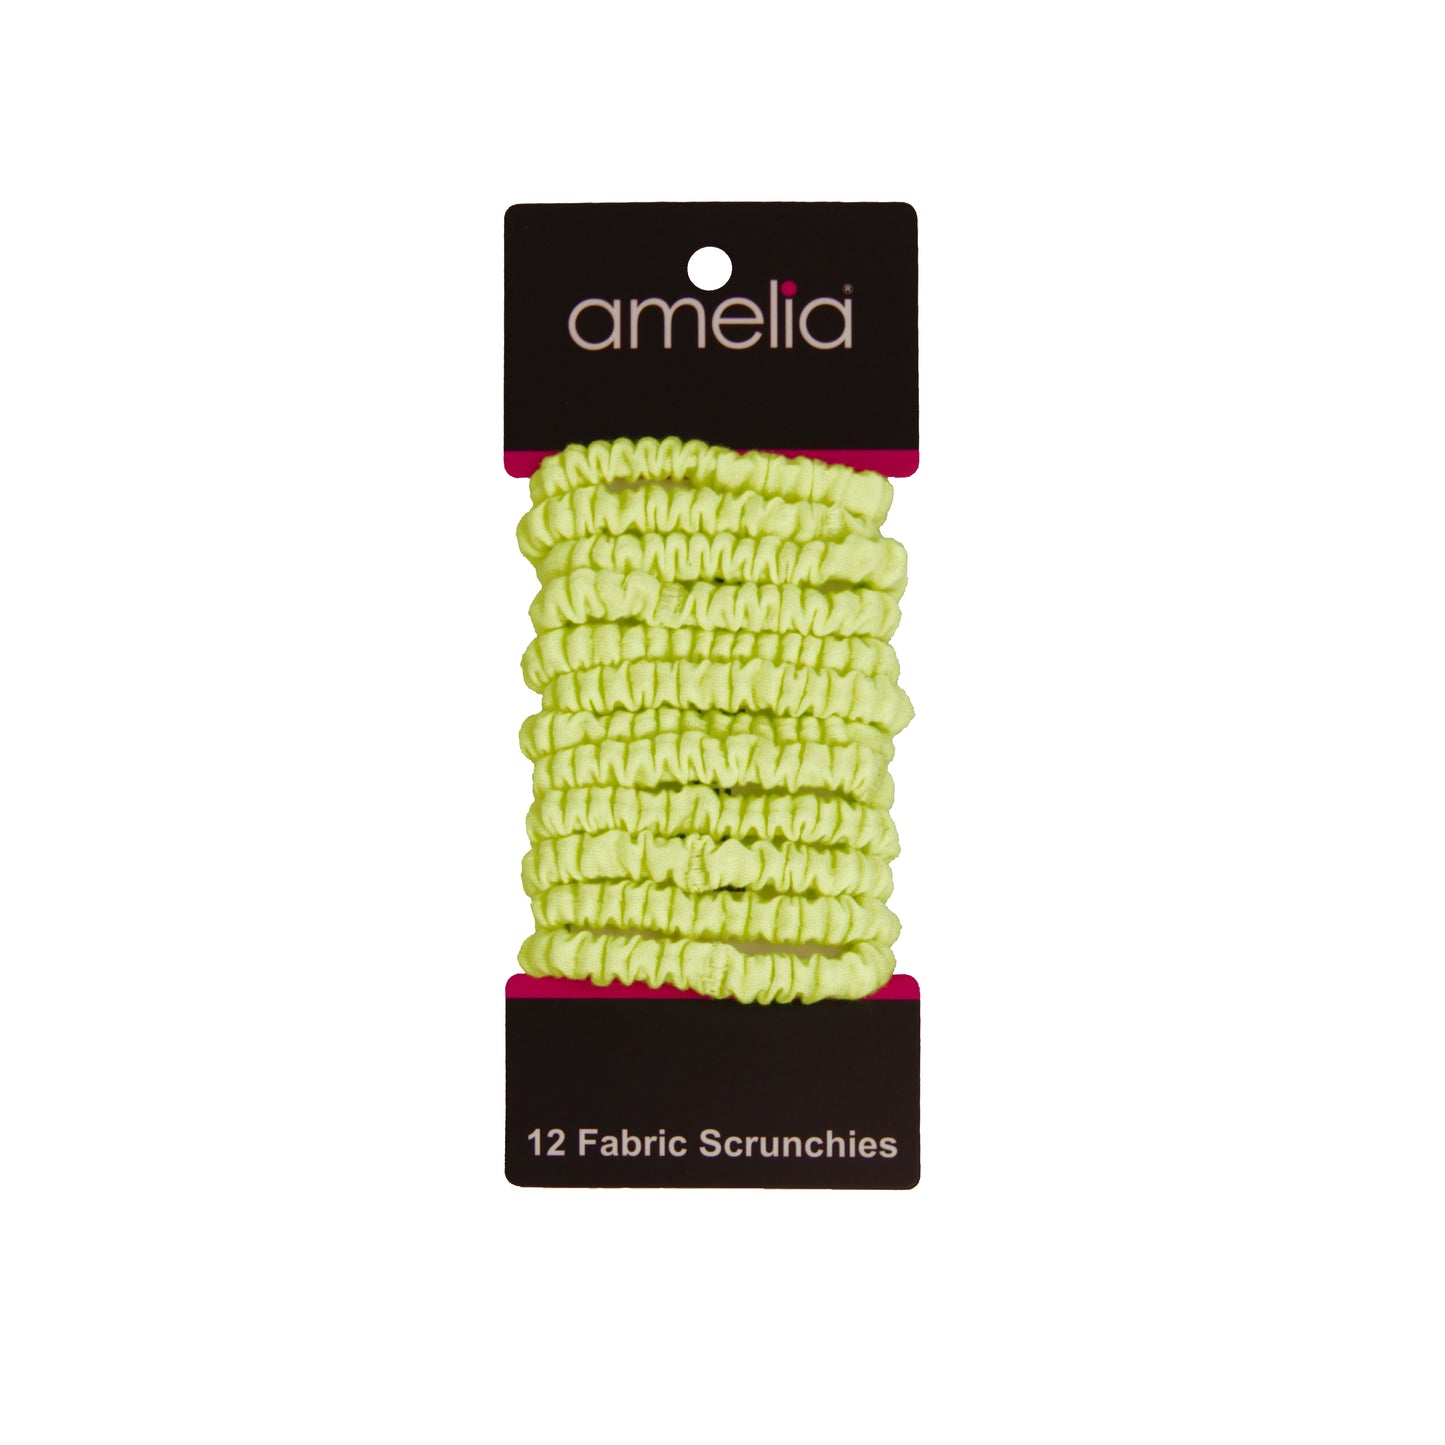 Amelia Beauty, Neon Yellow Skinny Jersey Scrunchies, 2.125in Diameter, Gentle on Hair, Strong Hold, No Snag, No Dents or Creases. 12 Pack